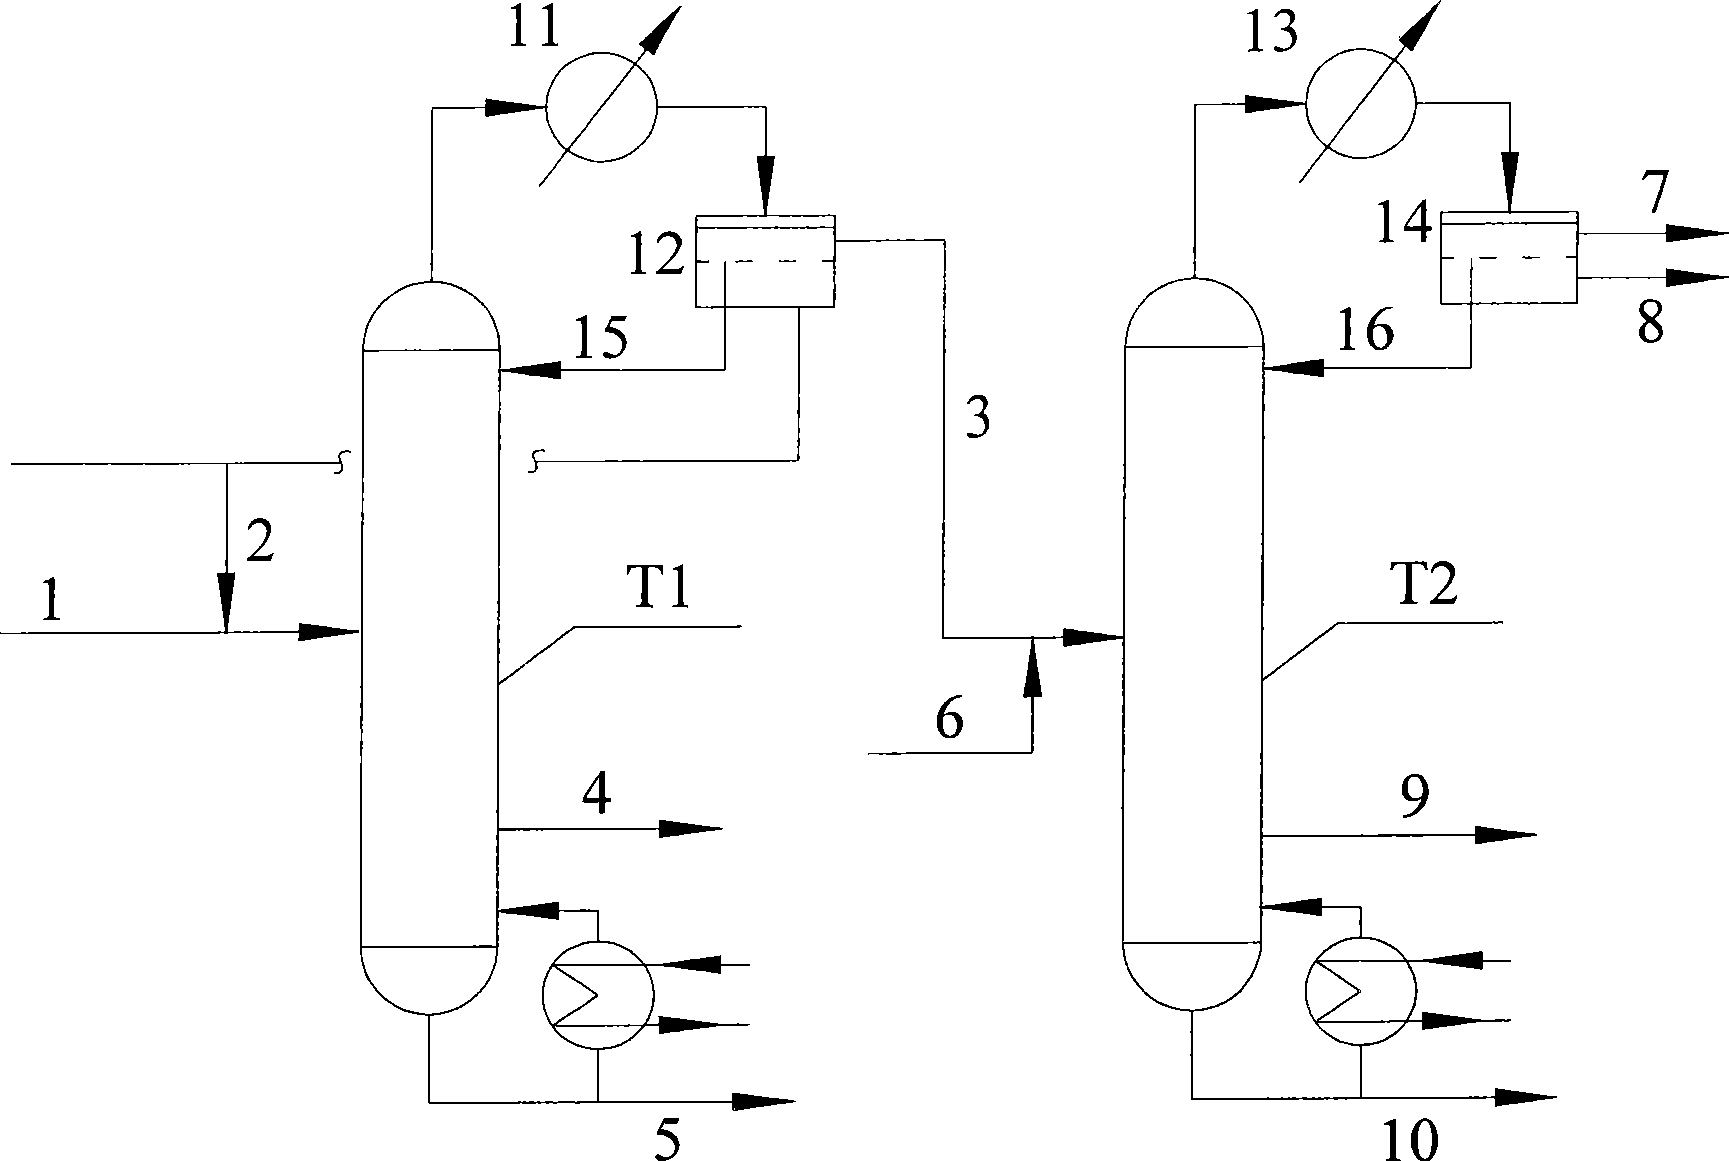 Method for separating acetic acid and sec-butyl acetate from reaction products